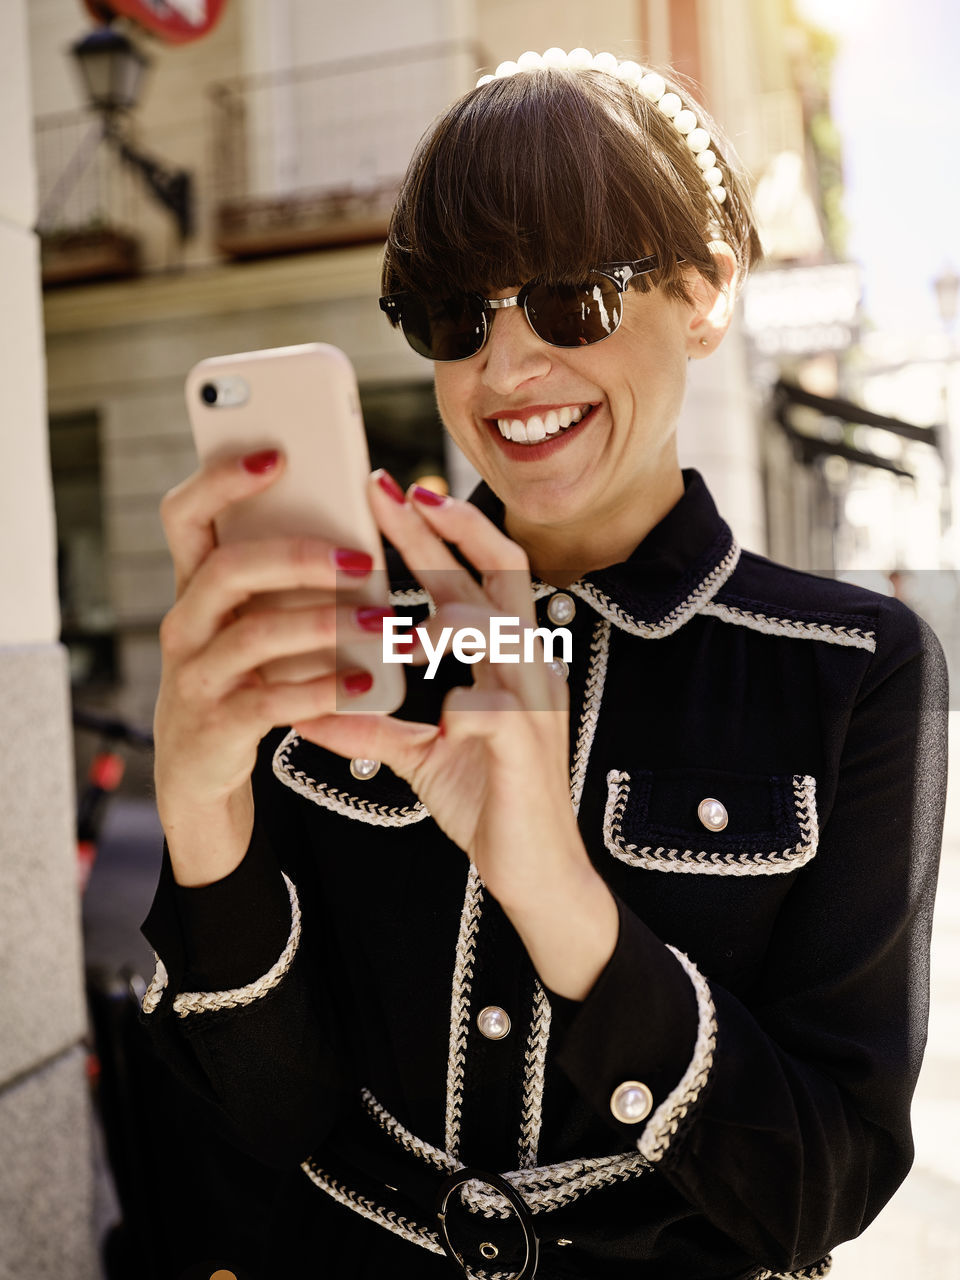 Smiling female with bob hairstyle and in trendy jacket and blouse standing on sidewalk on sunny day and messaging online via cellphone